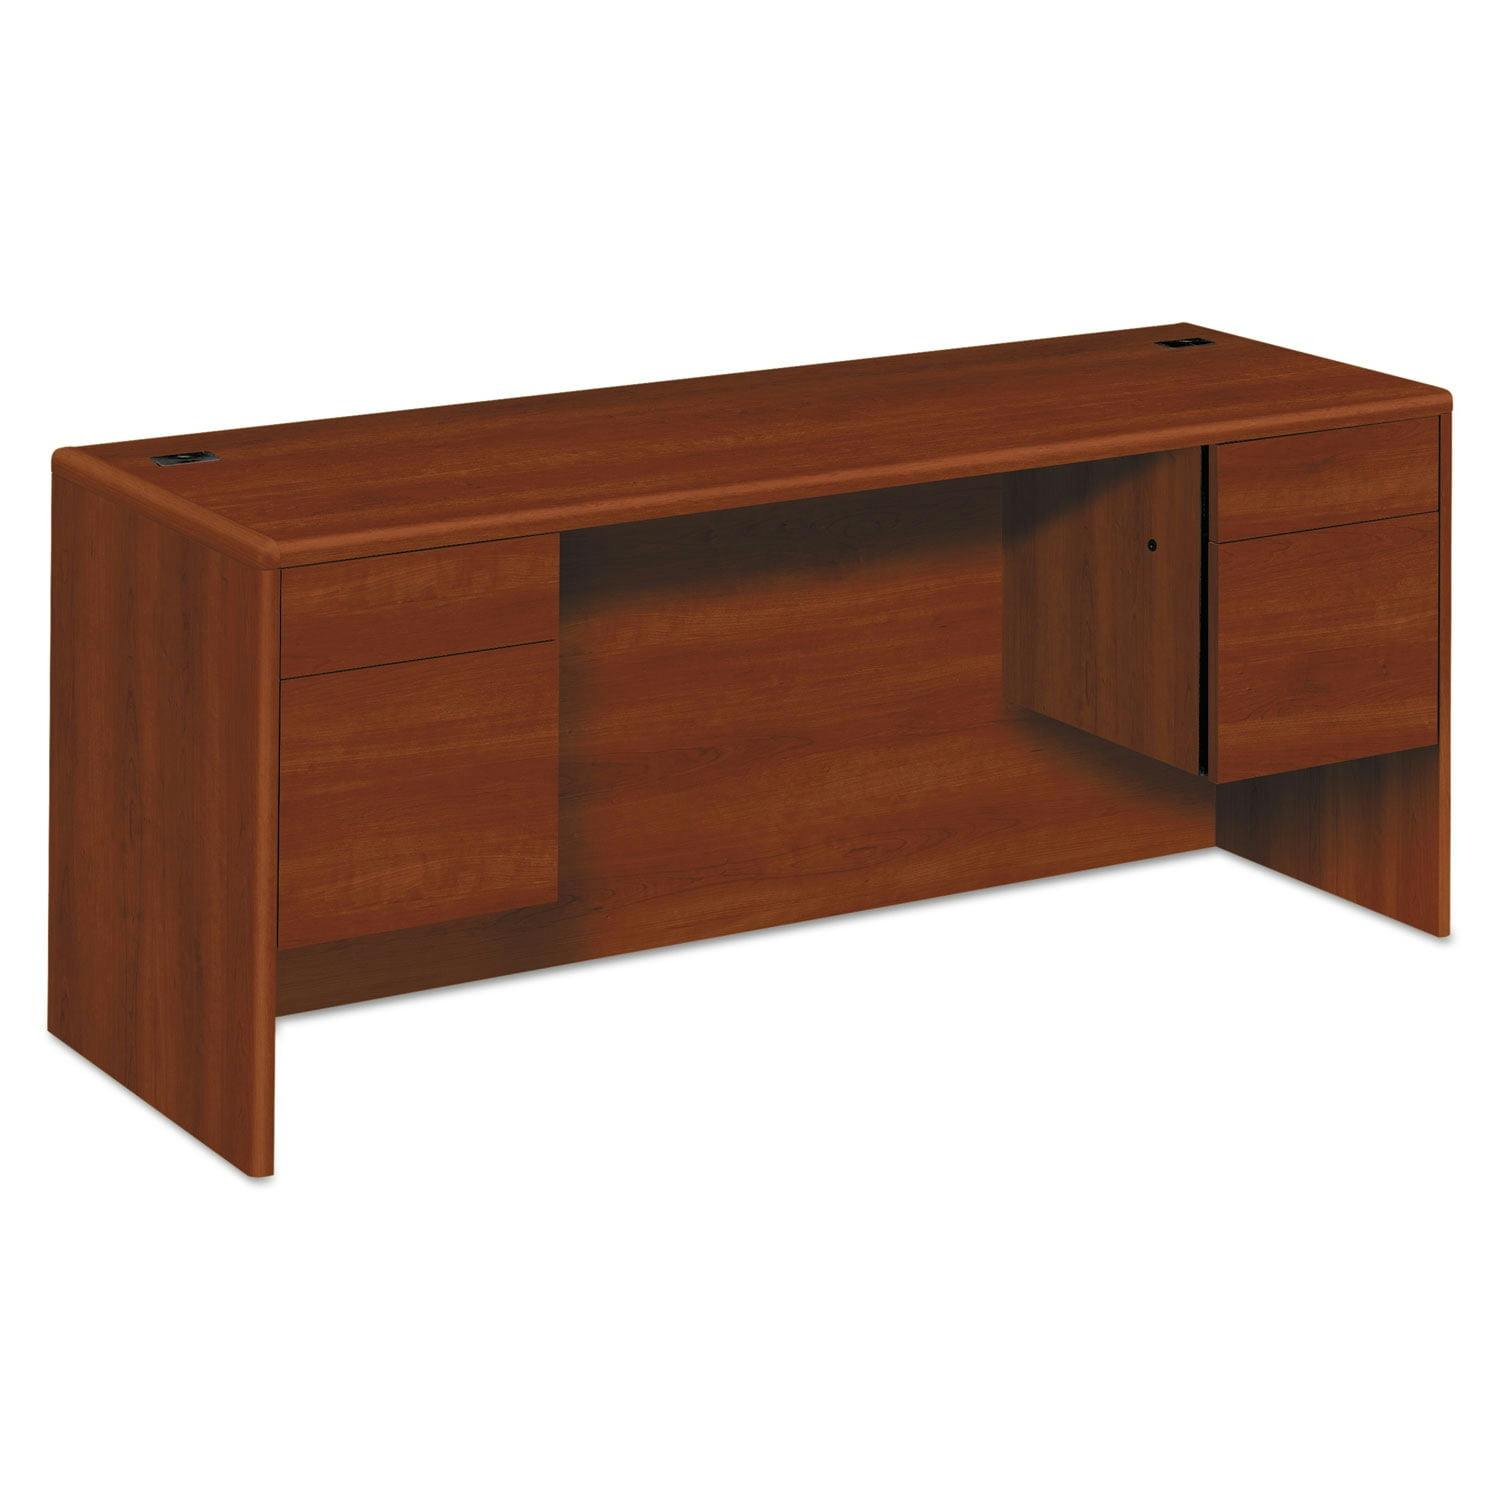 Cognac 72" Laminate Wood Kneespace Credenza with Rounded Edges